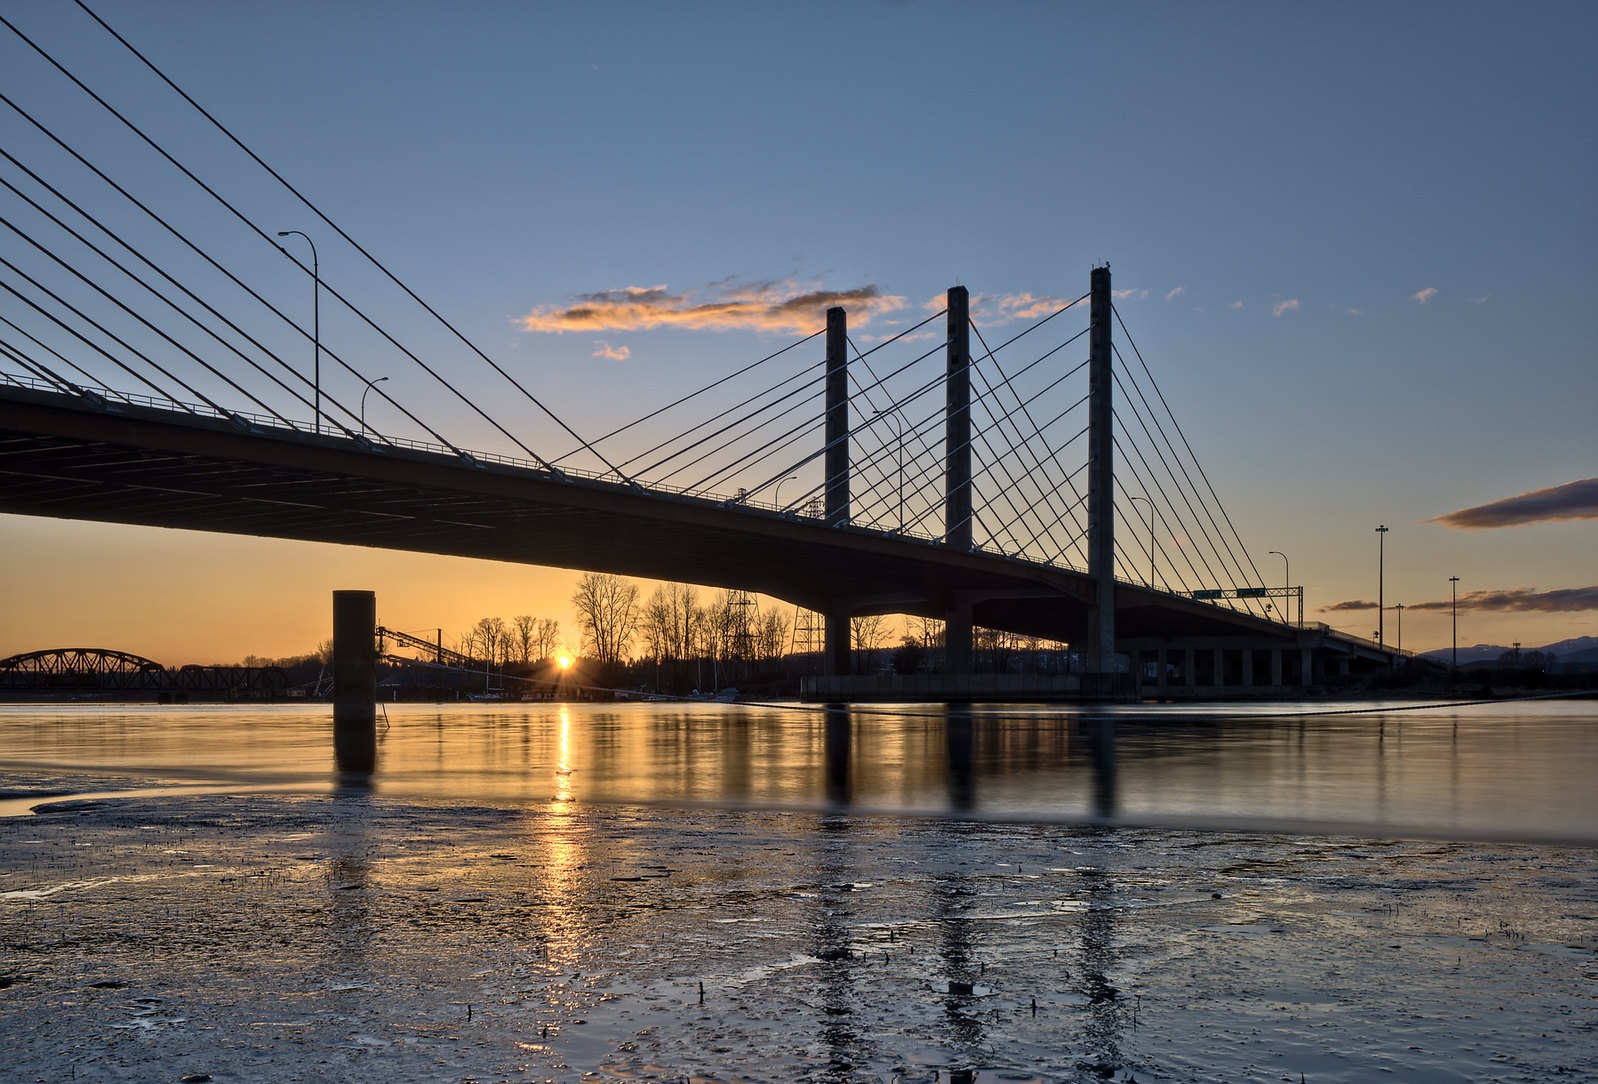 View of the bridge during sunset in Pitt Meadows